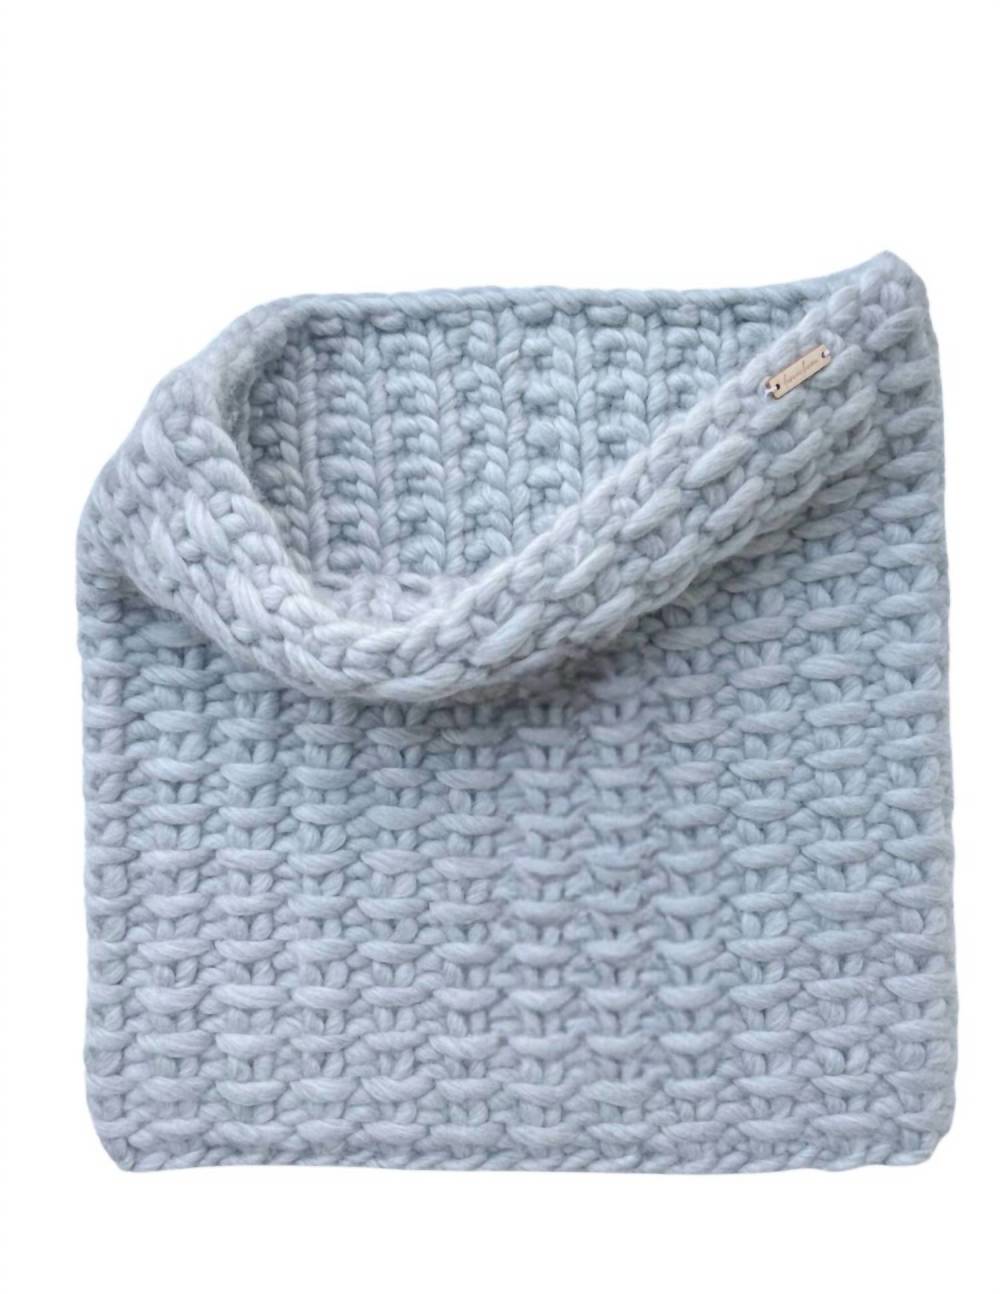 Archive Knitwear - The Stowe Snood Scarf